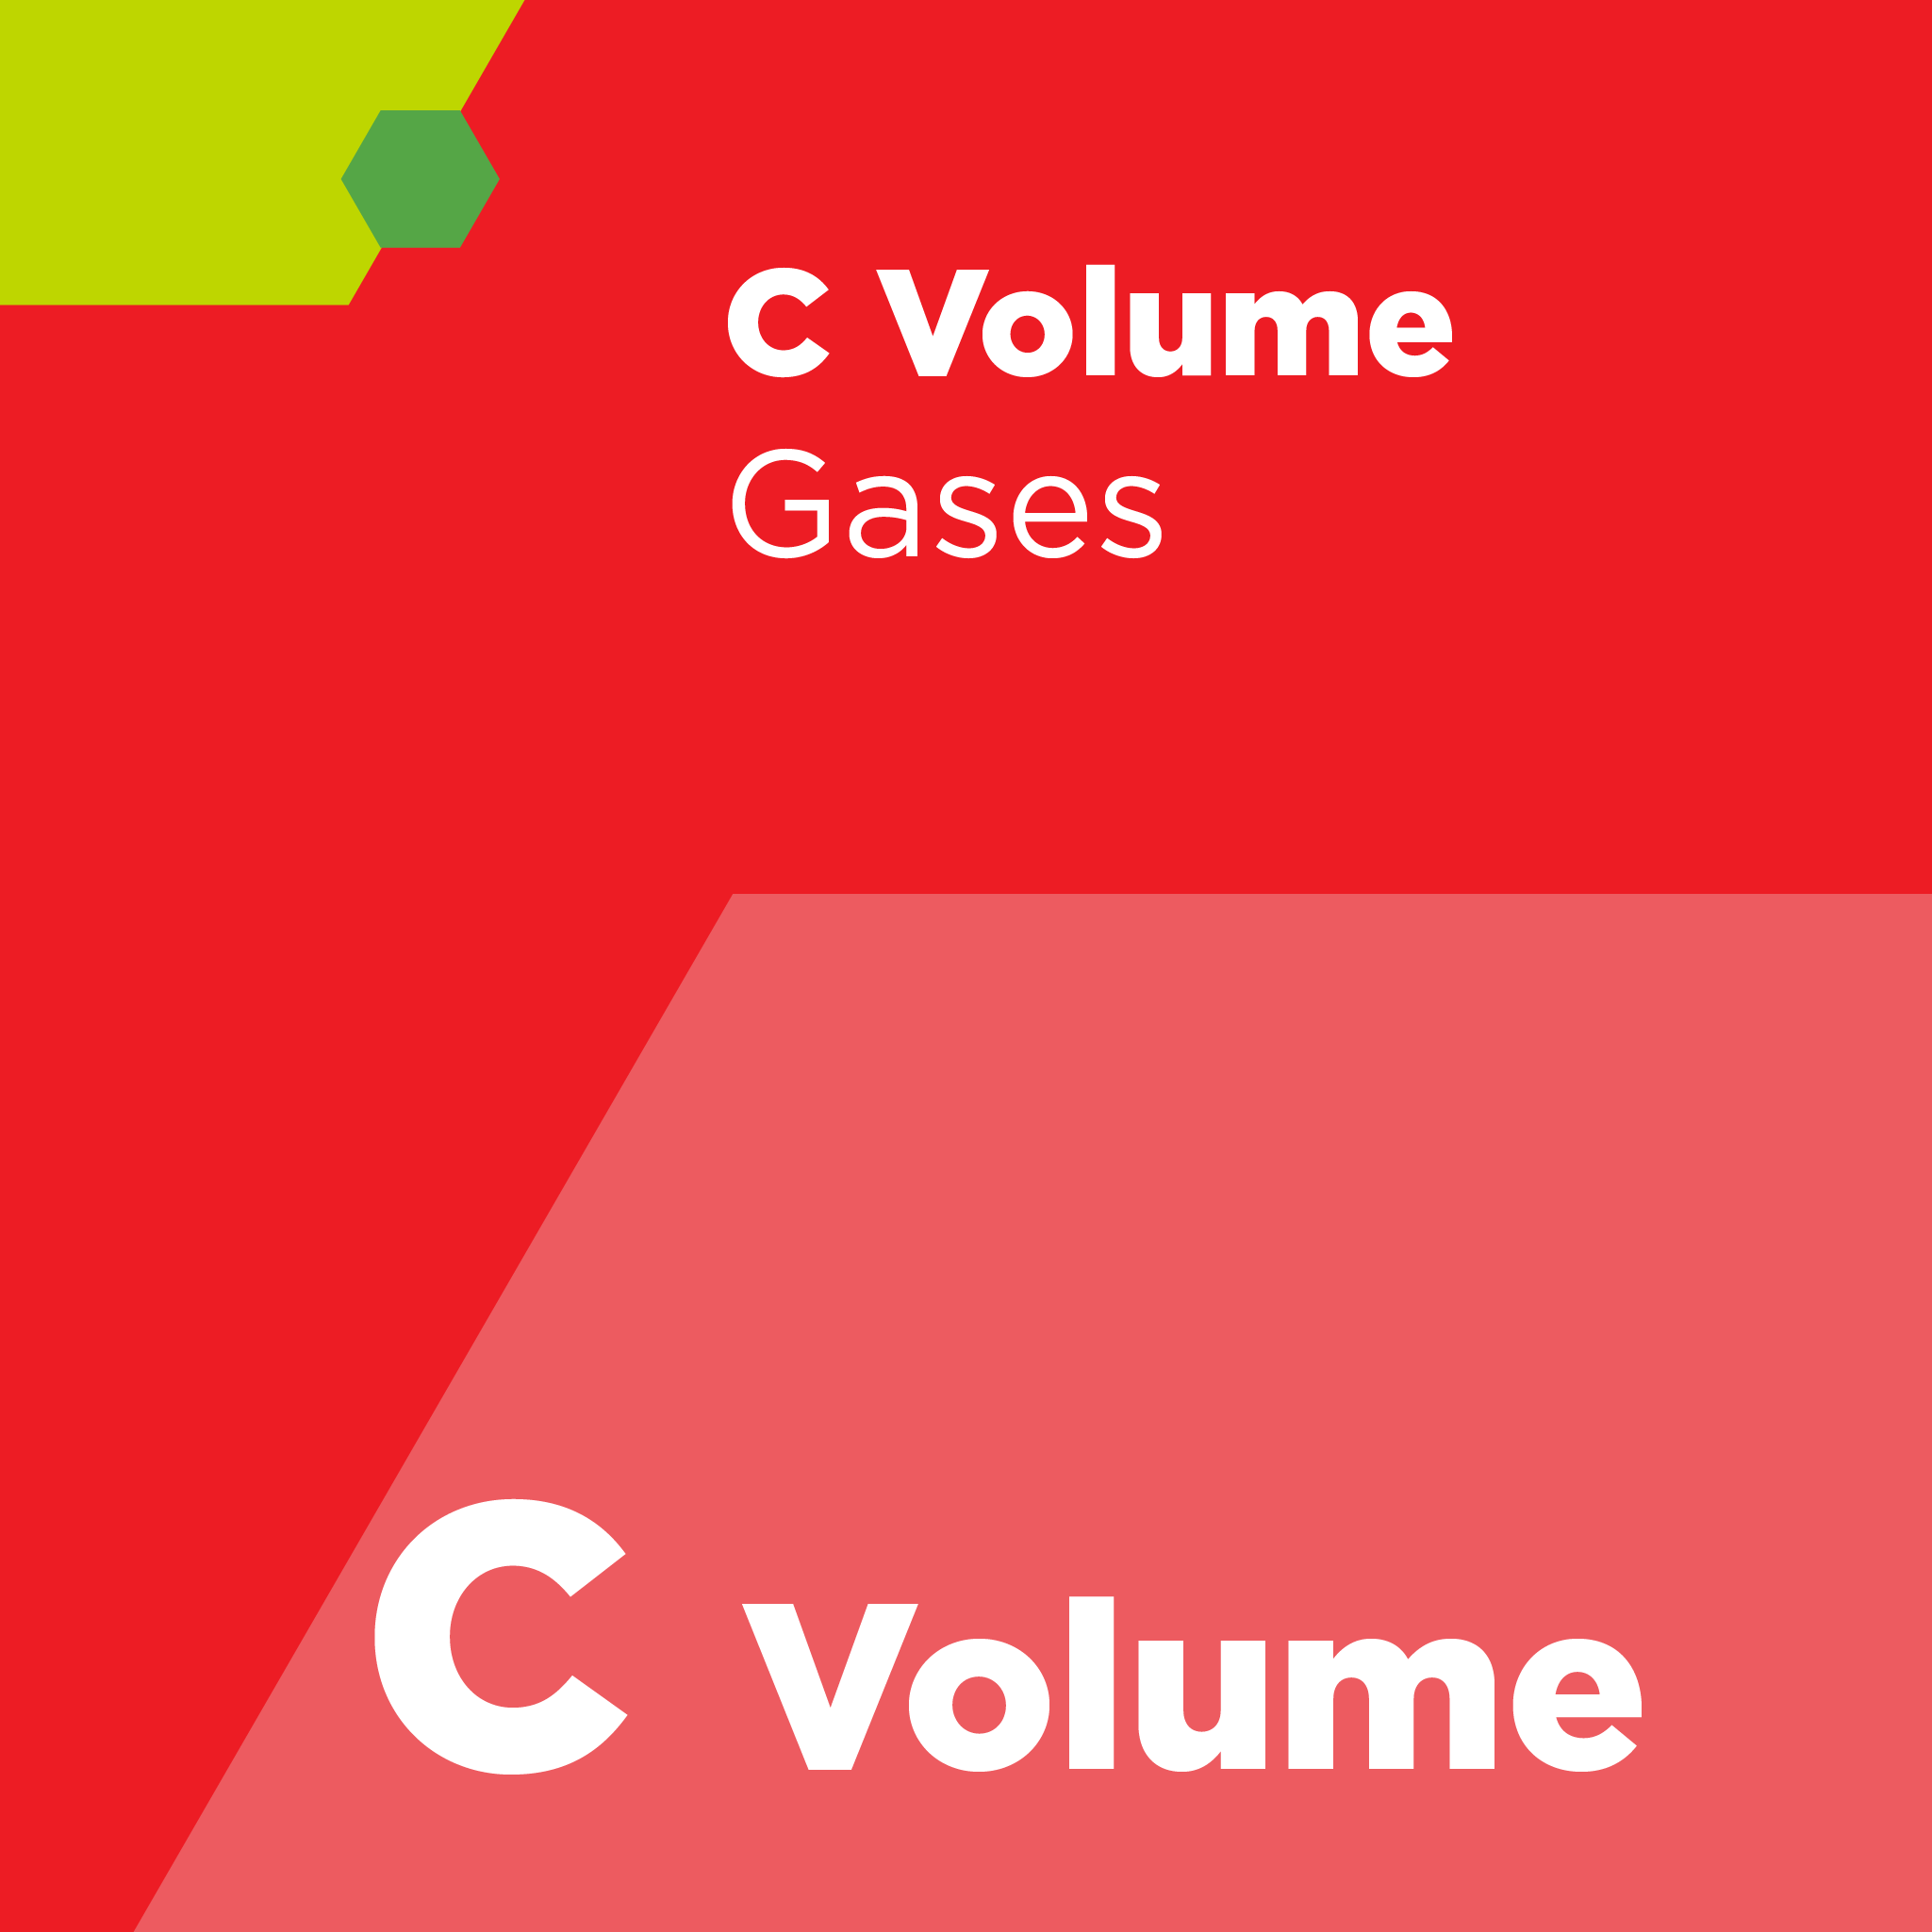 C09700 - SEMI C97 - Specification for Determination of Particle Levels of Gases Delivered as Pipeline Gas or by Pressurized Gas Cylinder